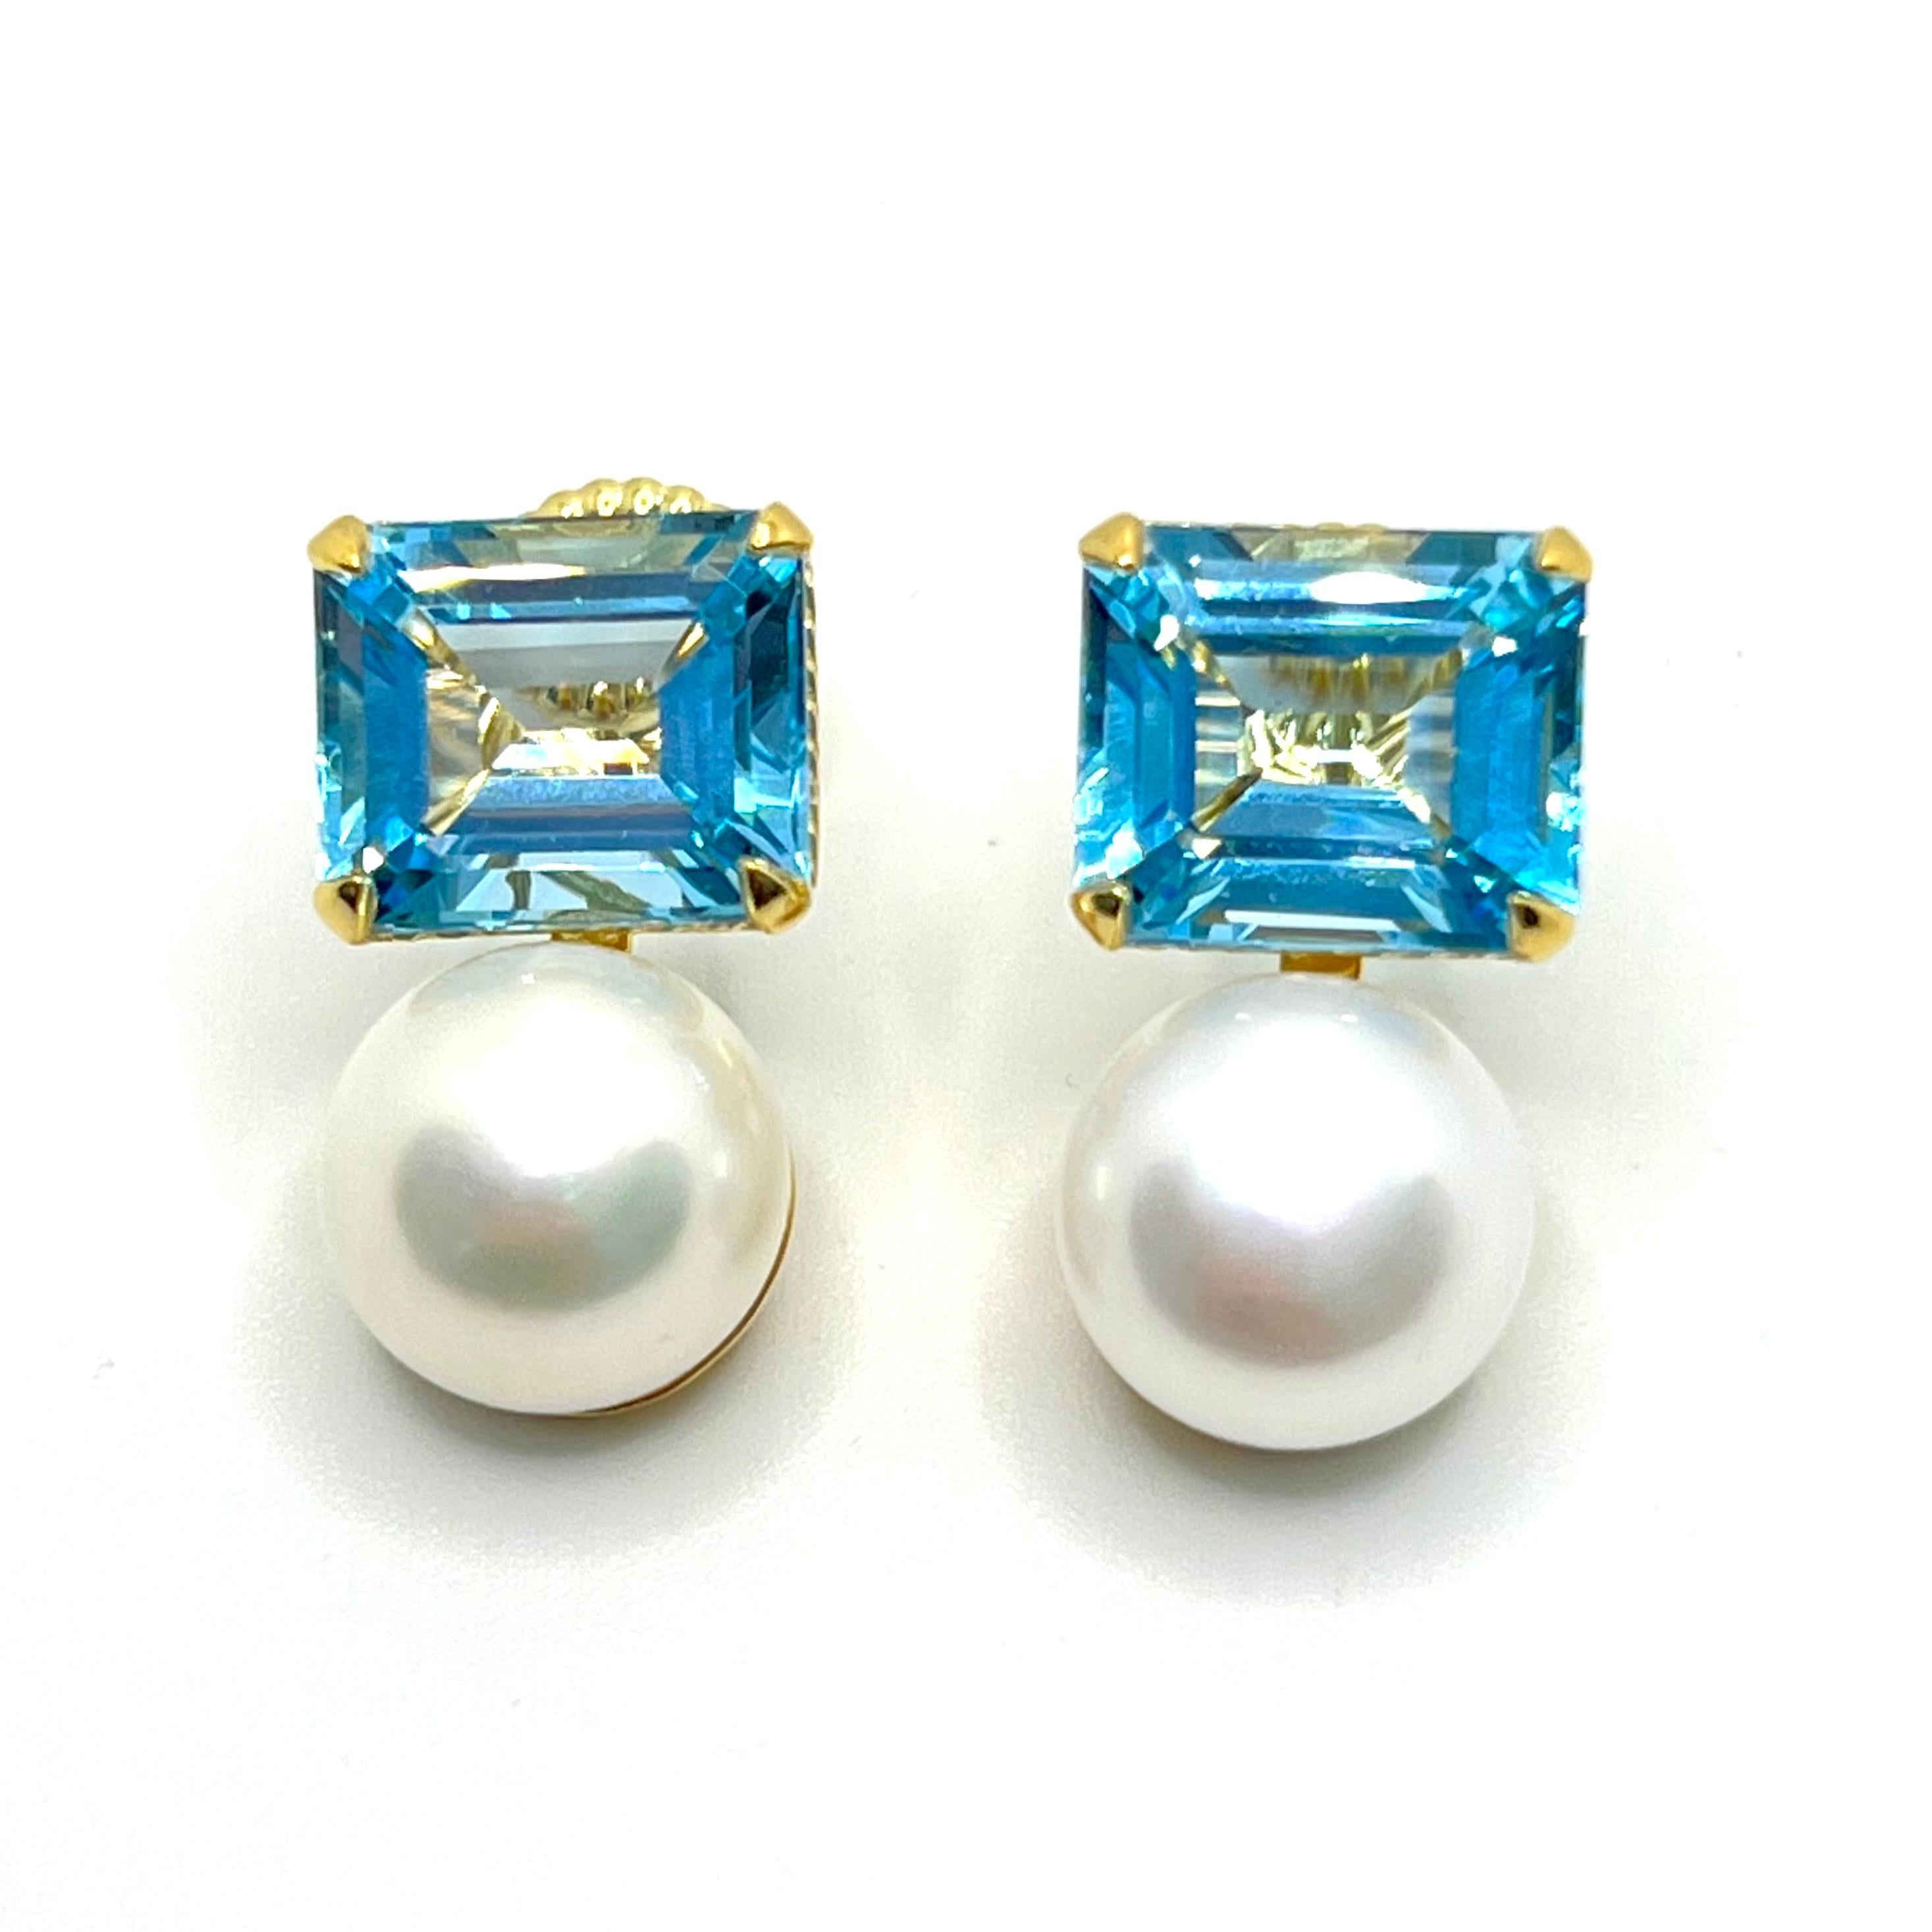 Stunning Bijoux Num Emerald-cut Blue Topaz & Freshwater Pearl Vermeil Earrings. 

The earrings feature 2 beautiful emerald-cut sky blue topaz and 2 lustrous 12mm cultured freshwater pearl, handset in 18k gold vermeil over sterling silver.  Straight